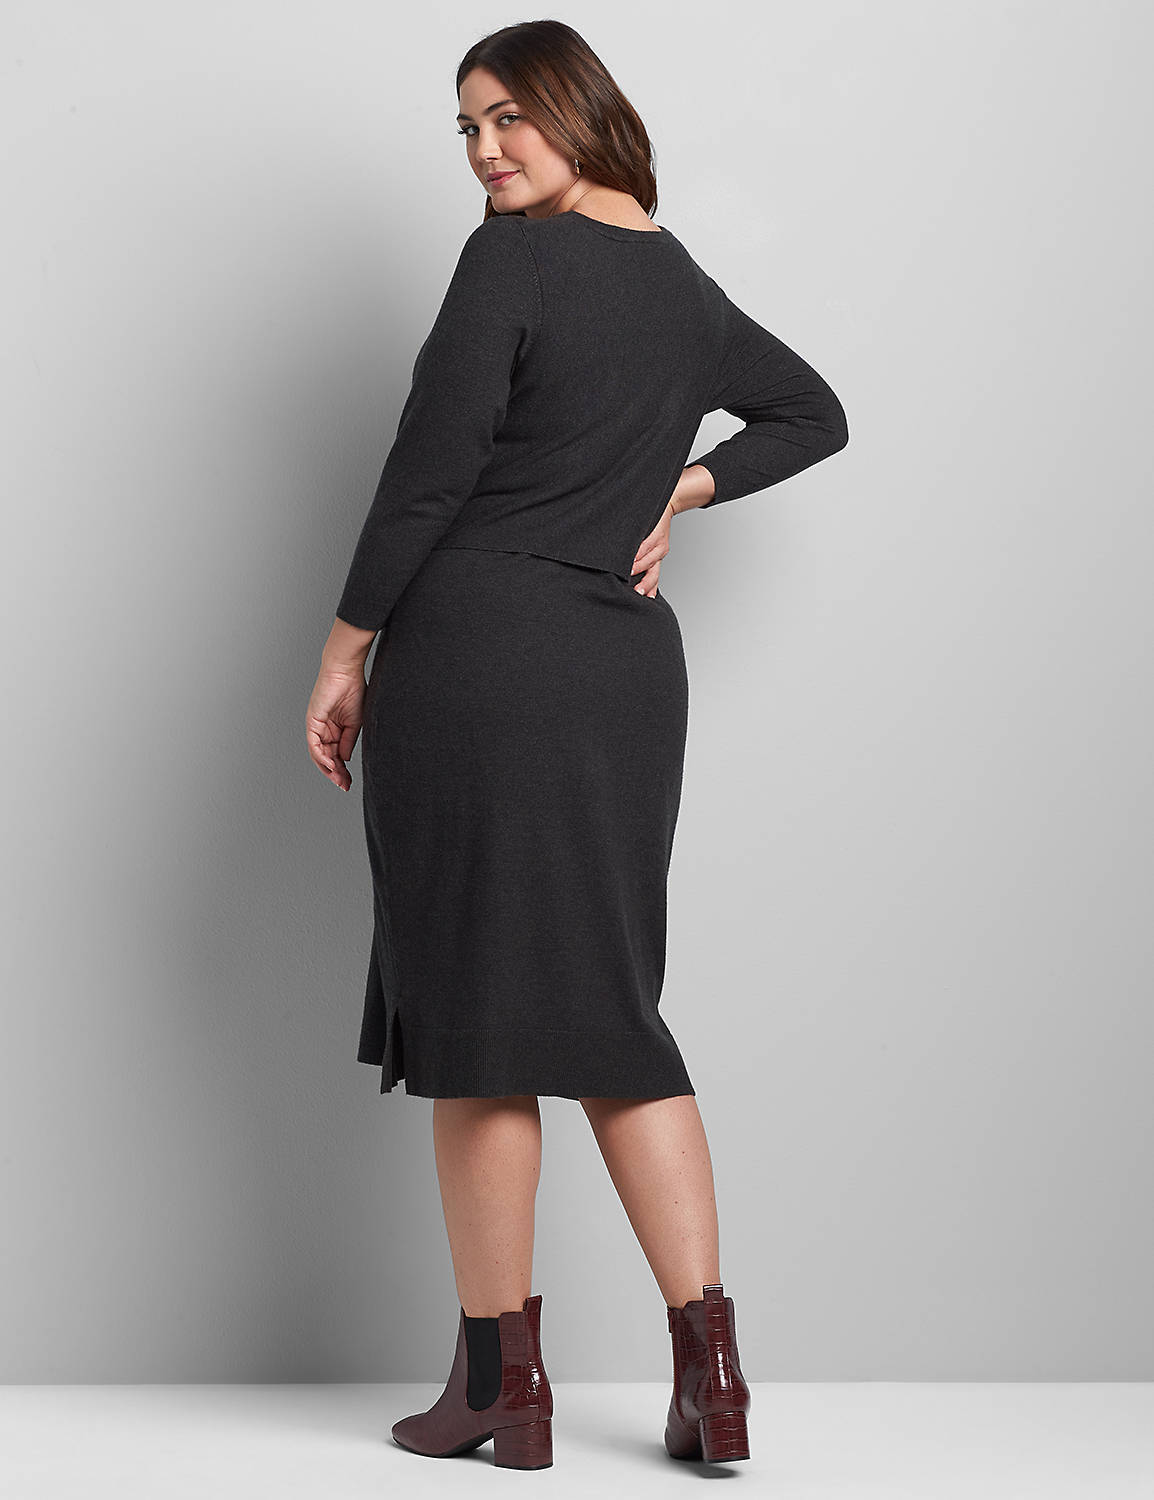 1115871 3/4 Sleeve Crew Neck Short Tie Front Sweater Dress:Charcoal Grey:14/16 Product Image 2